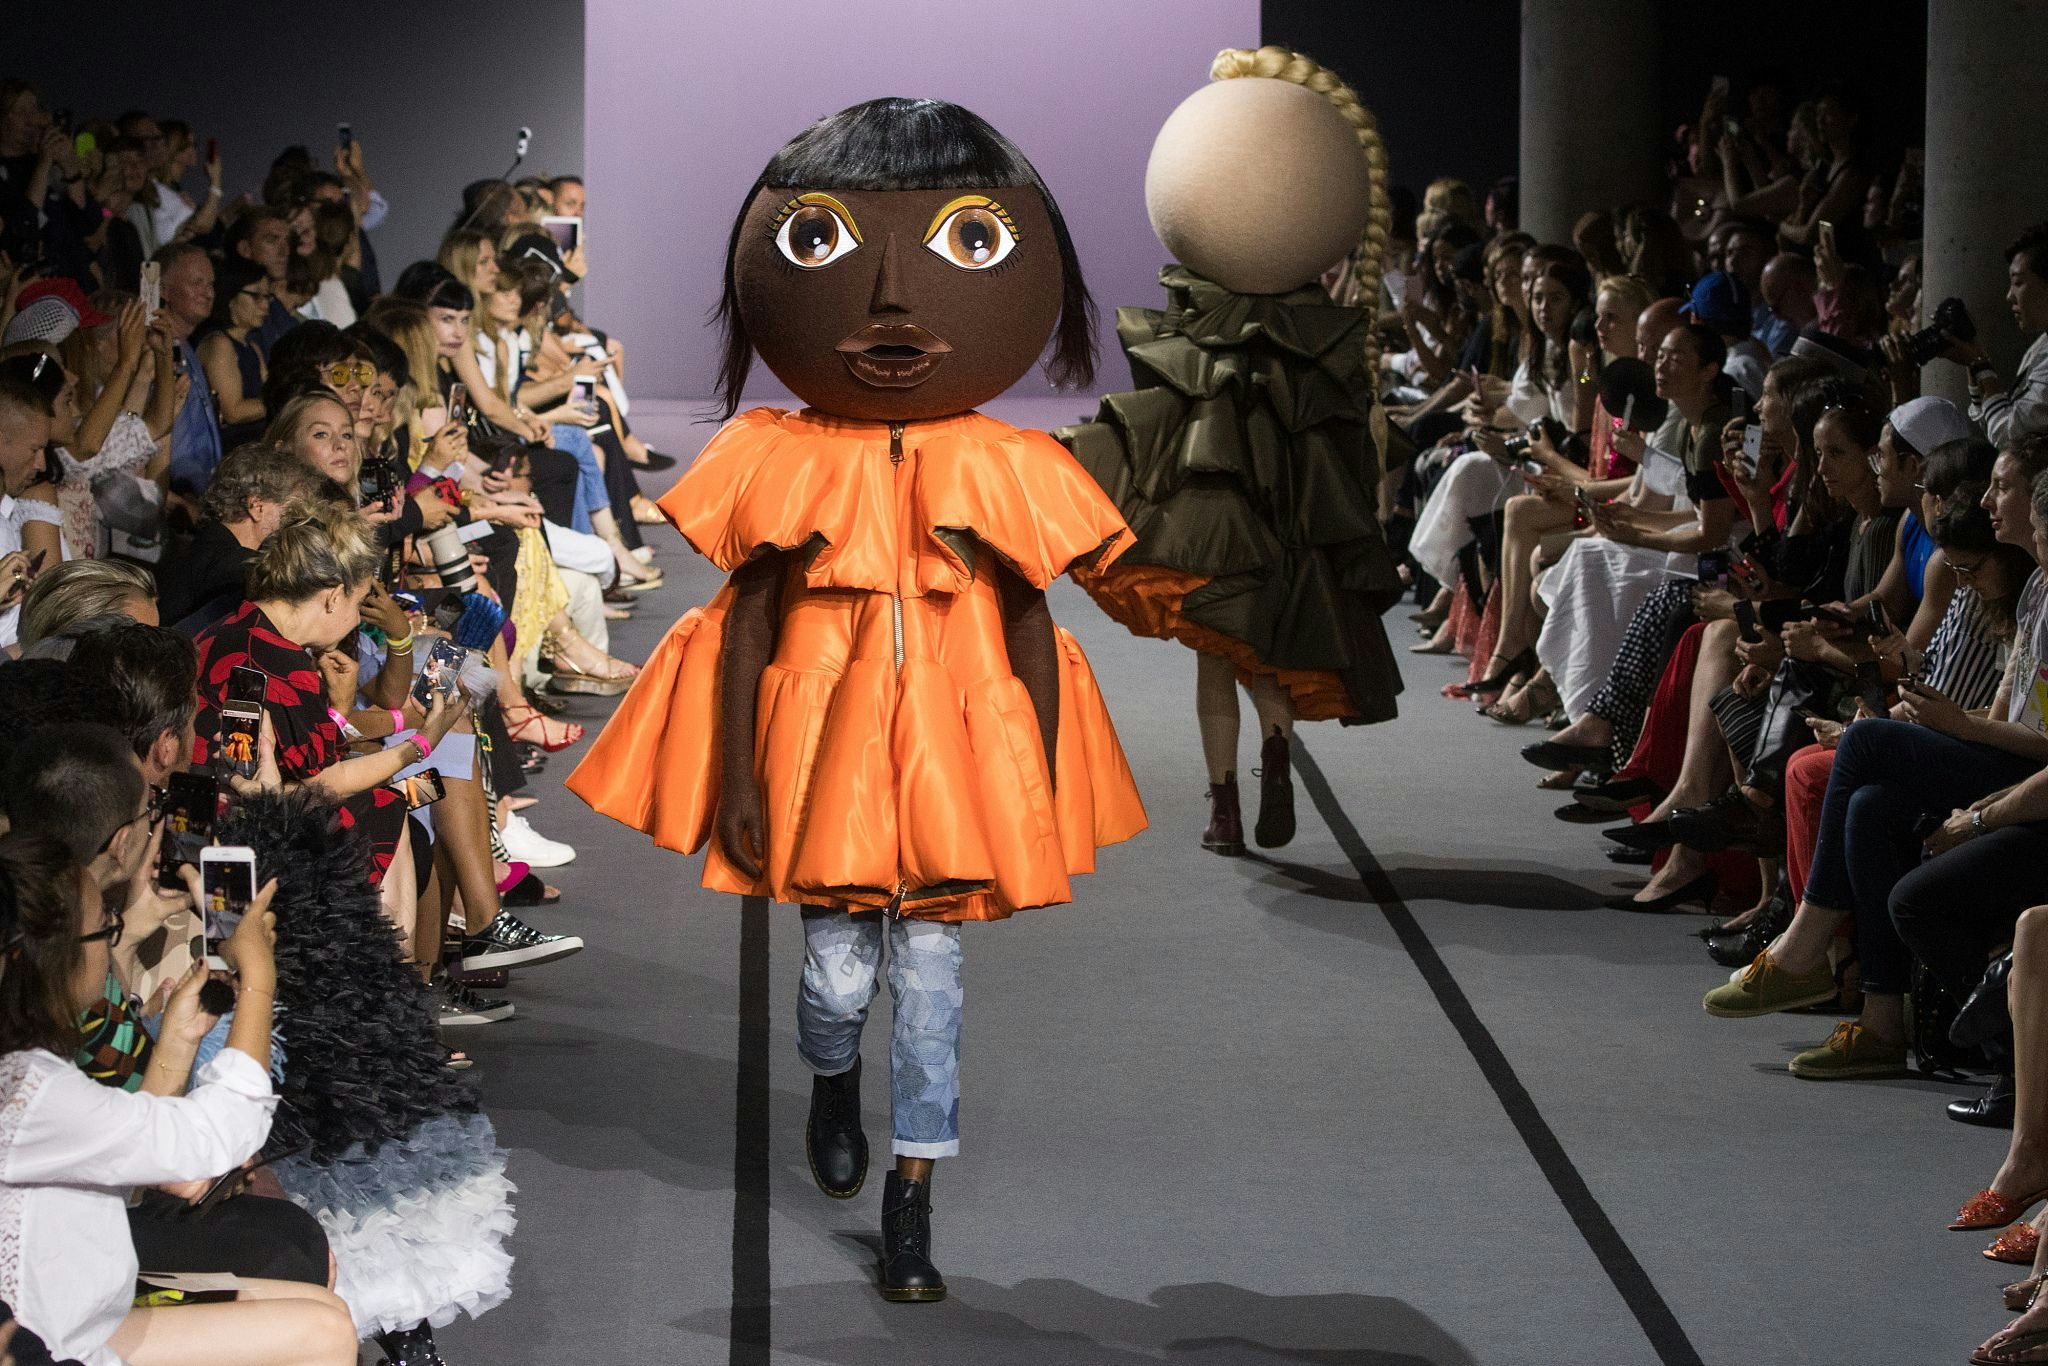 Chinese Design Student Accuses Viktor & Rolf of Copying His Work